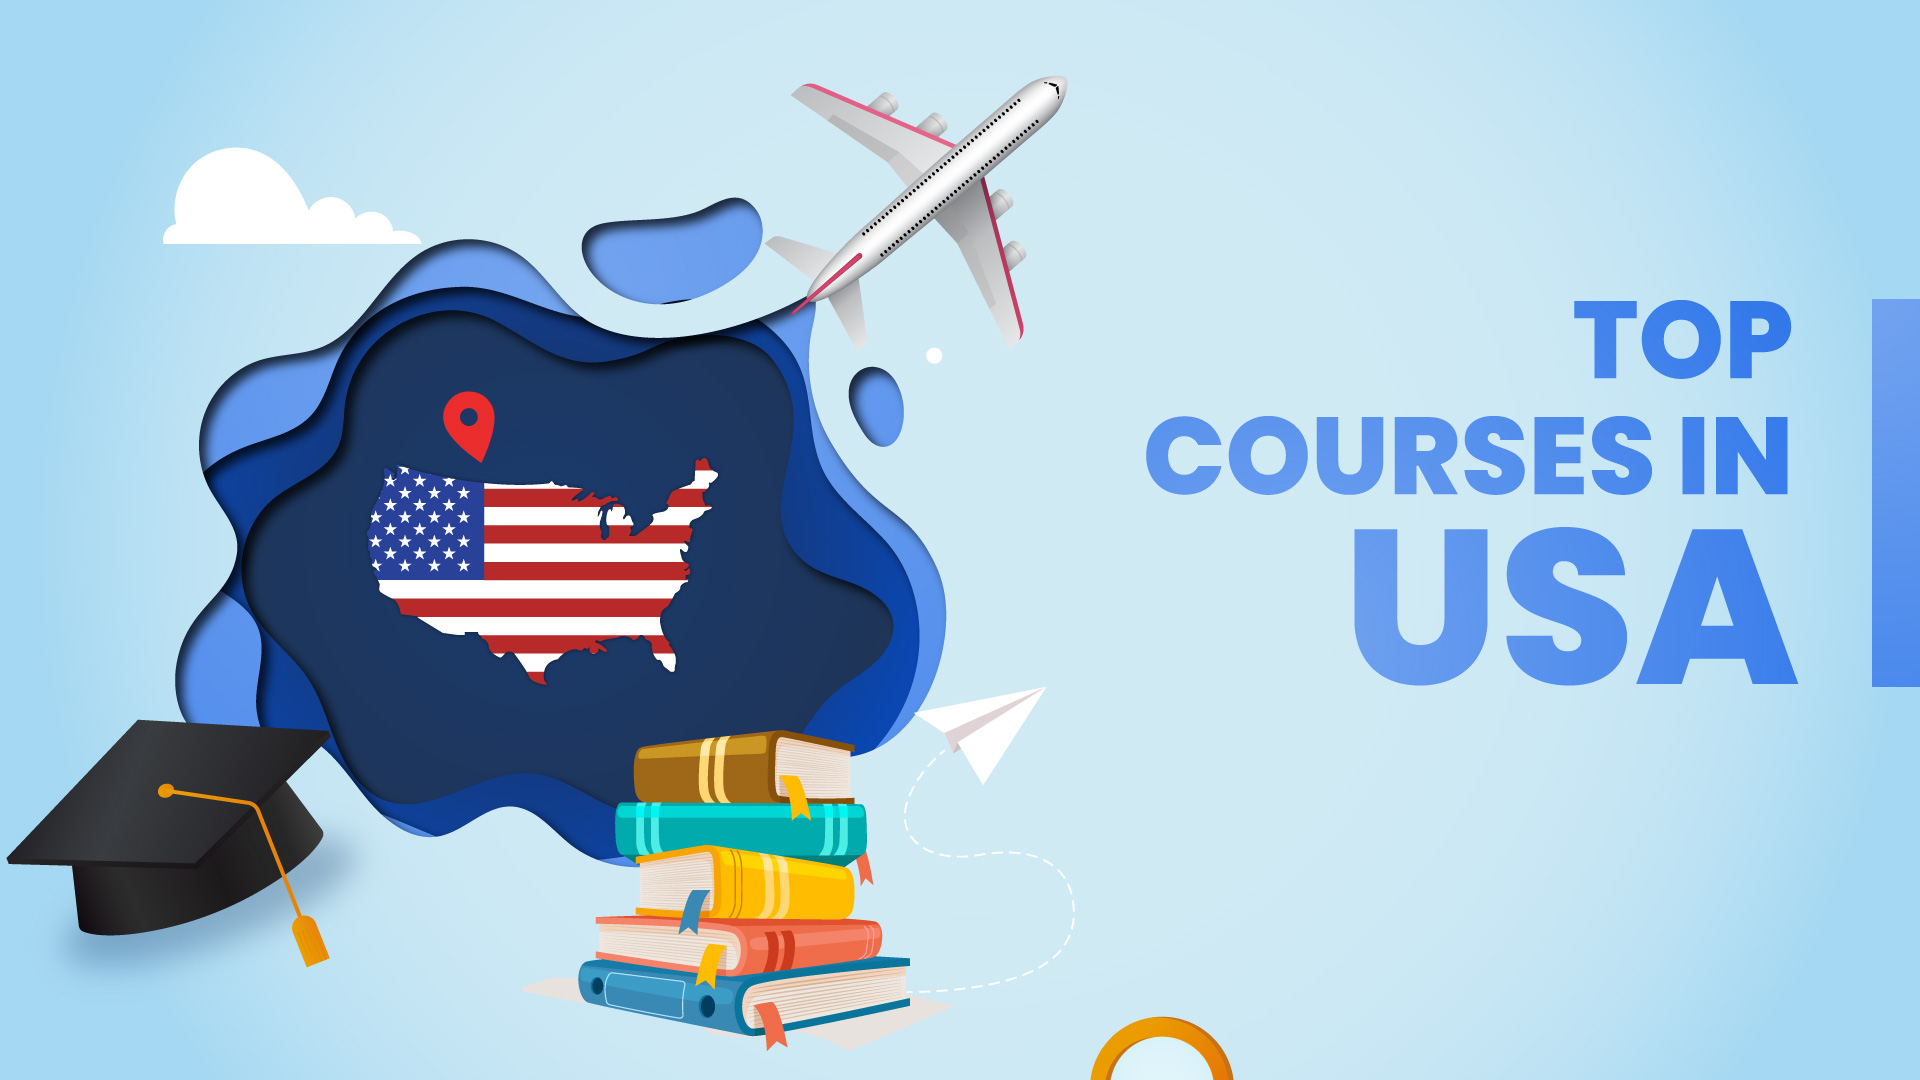 Top-Courses-in-US_20210709-140844_1